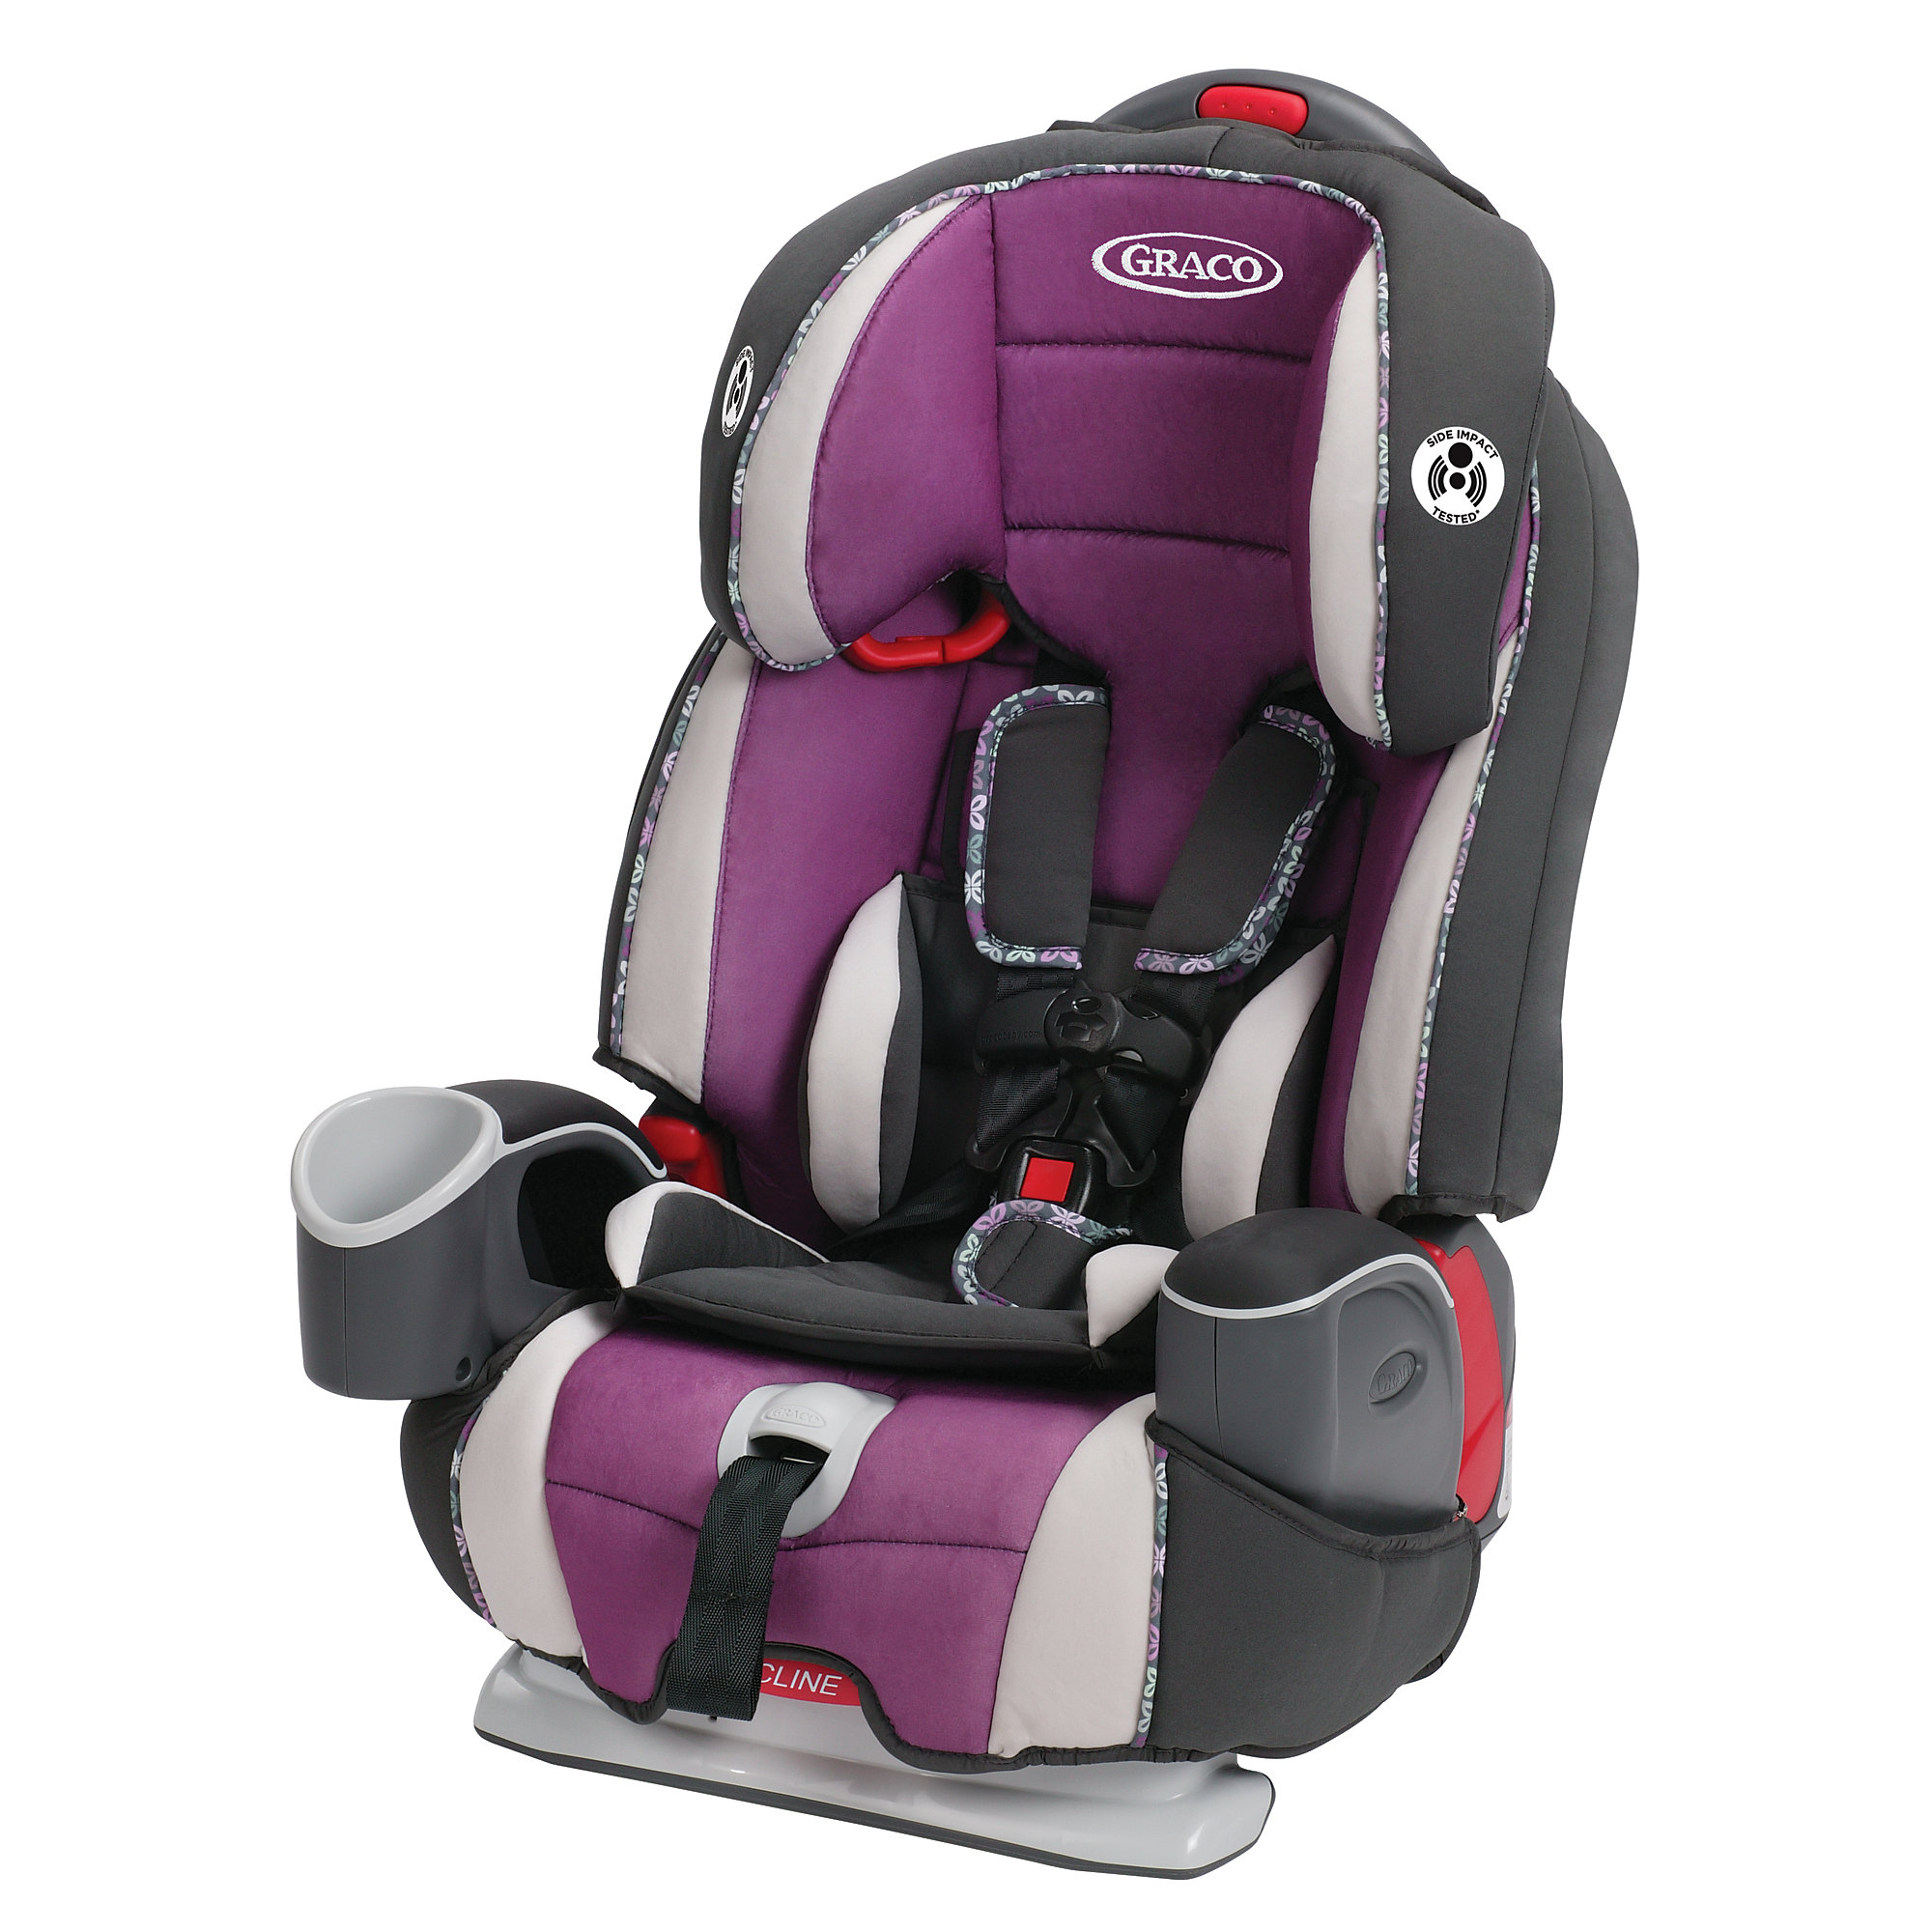 Graco Argos 65 3in1 Harness Booster